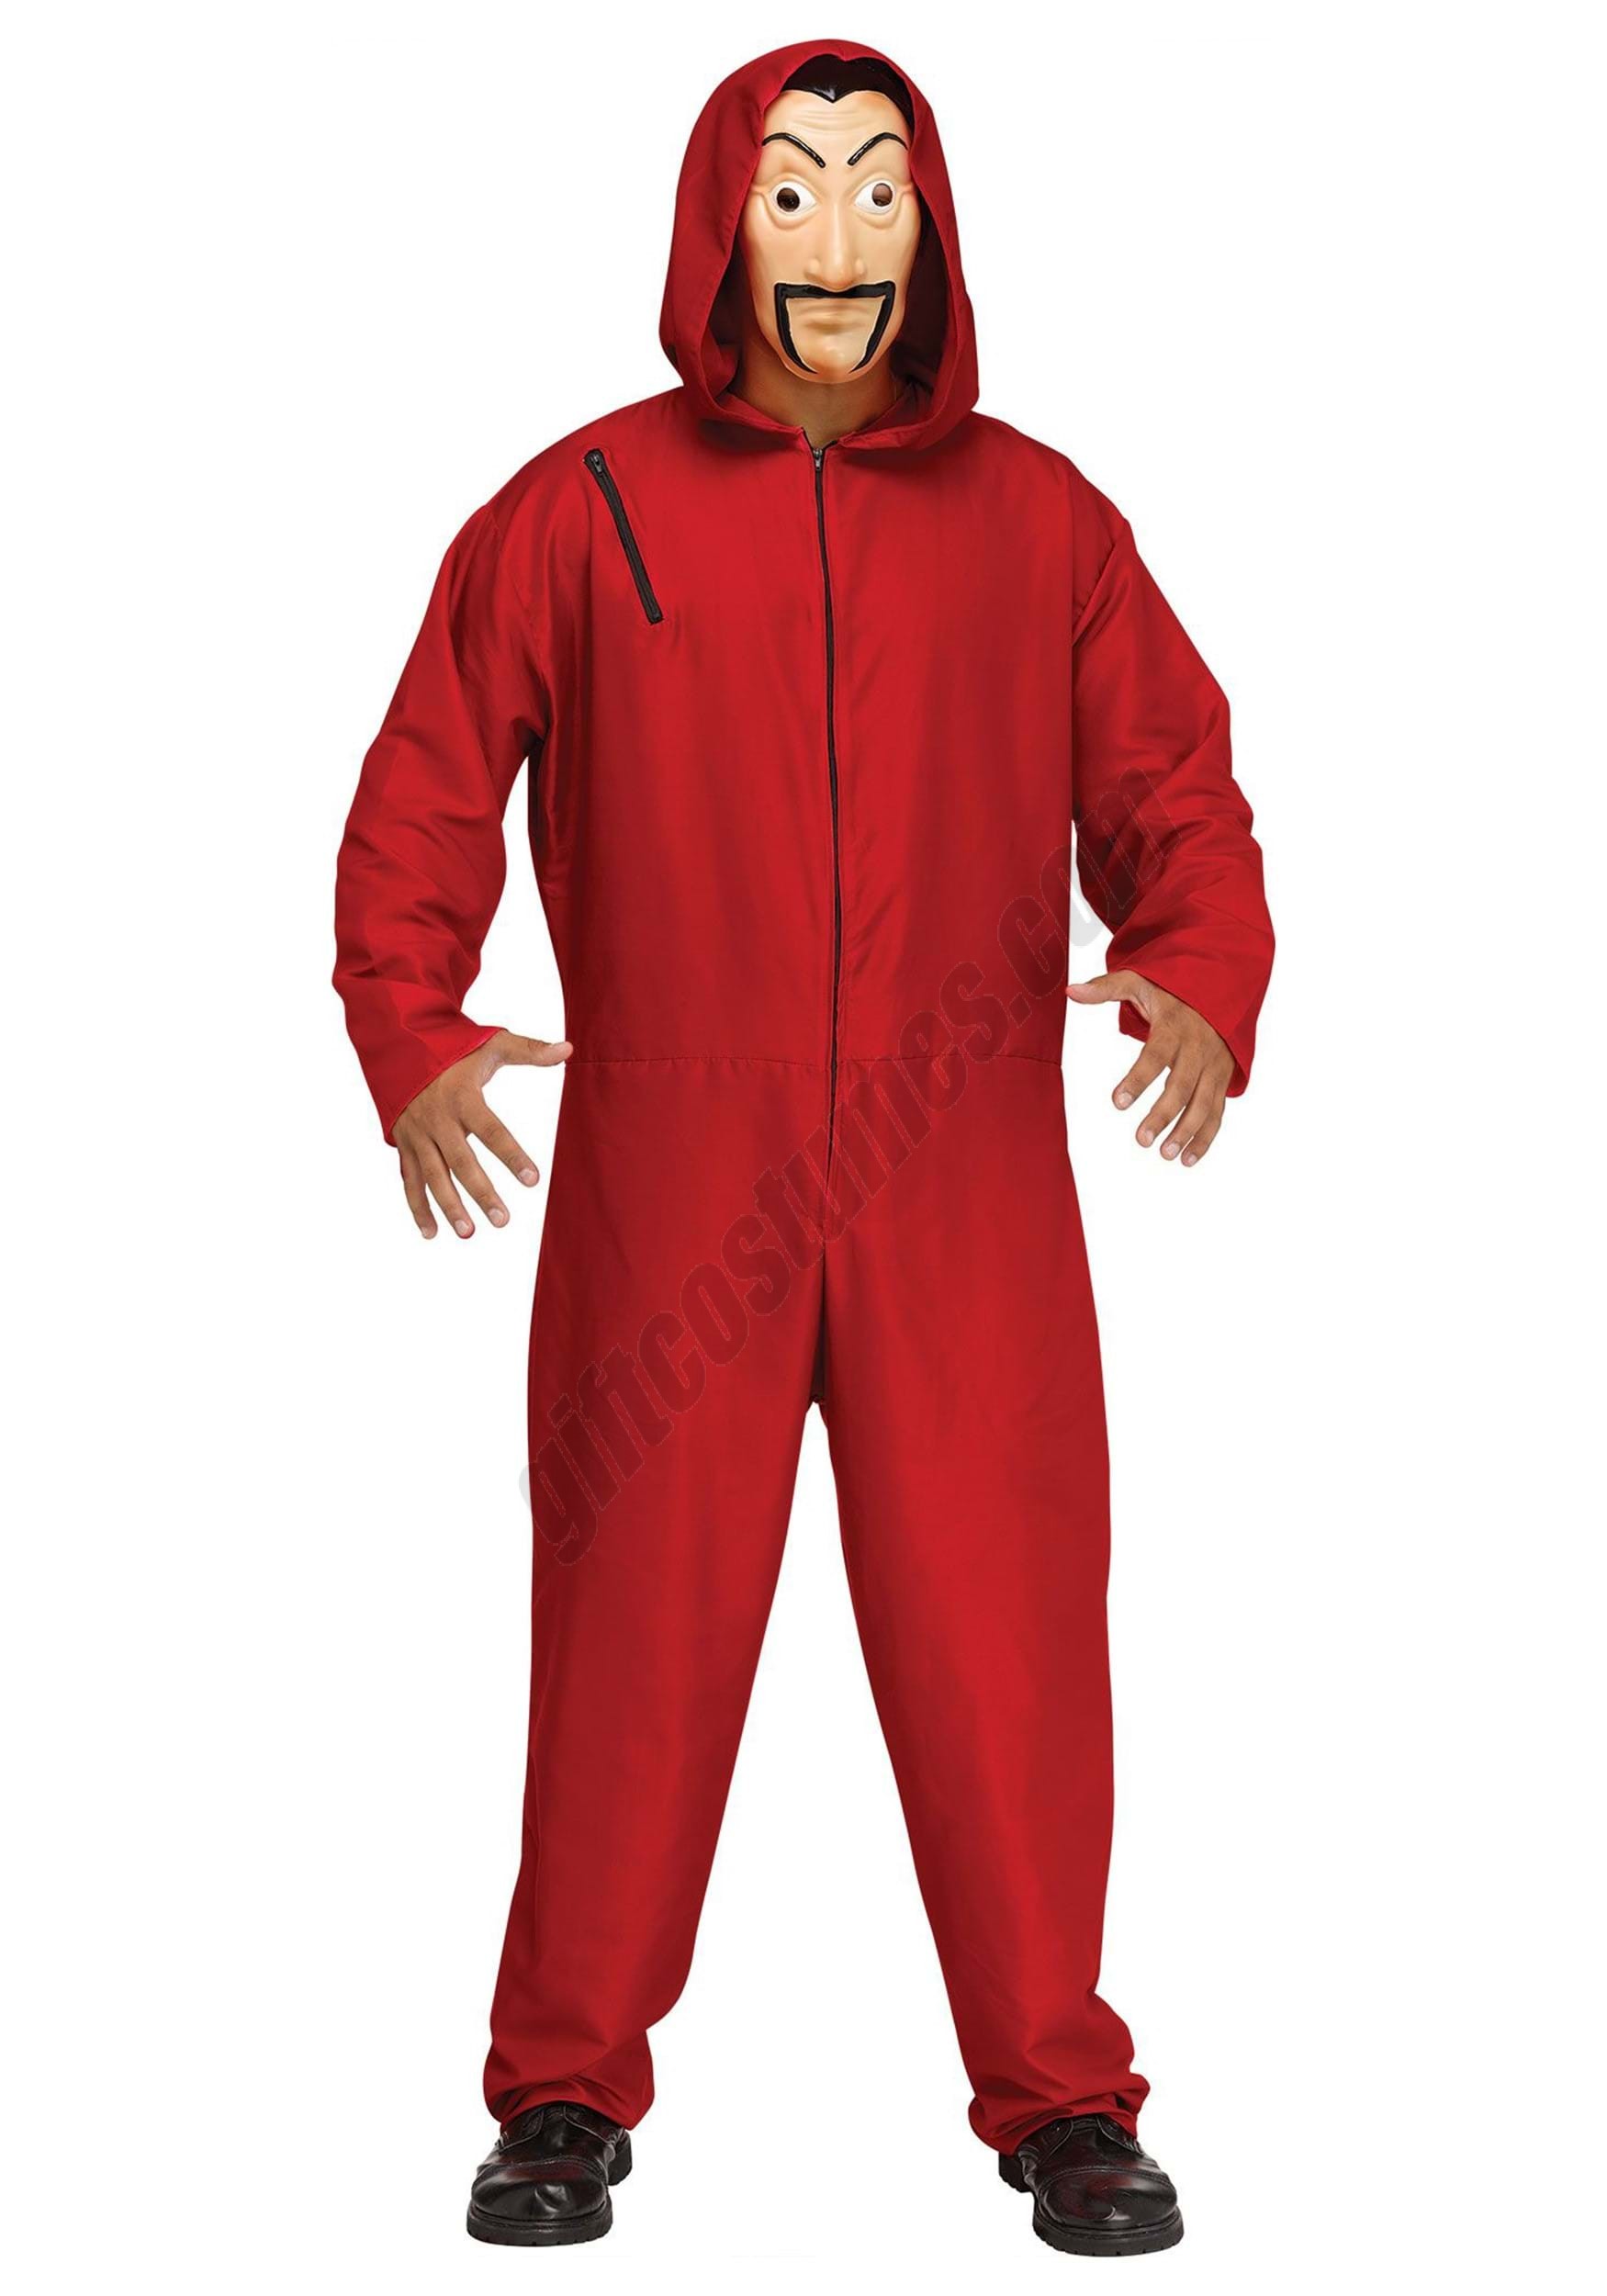 Red Bank Robber Costume for Adults - Women's - Red Bank Robber Costume for Adults - Women's